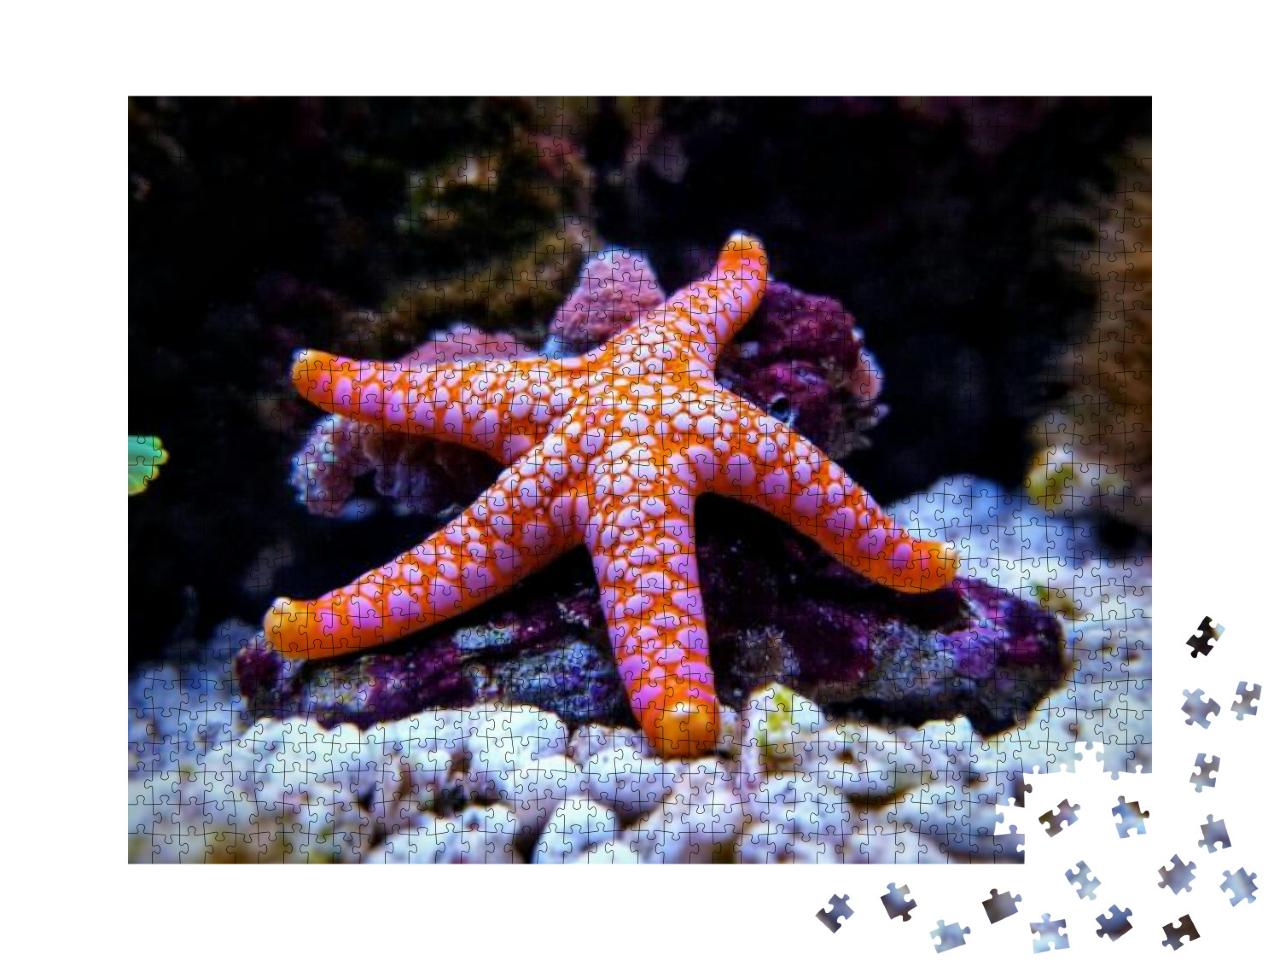 Fromia Seastar in Coral Reef Aquarium Tank is One of the... Jigsaw Puzzle with 1000 pieces